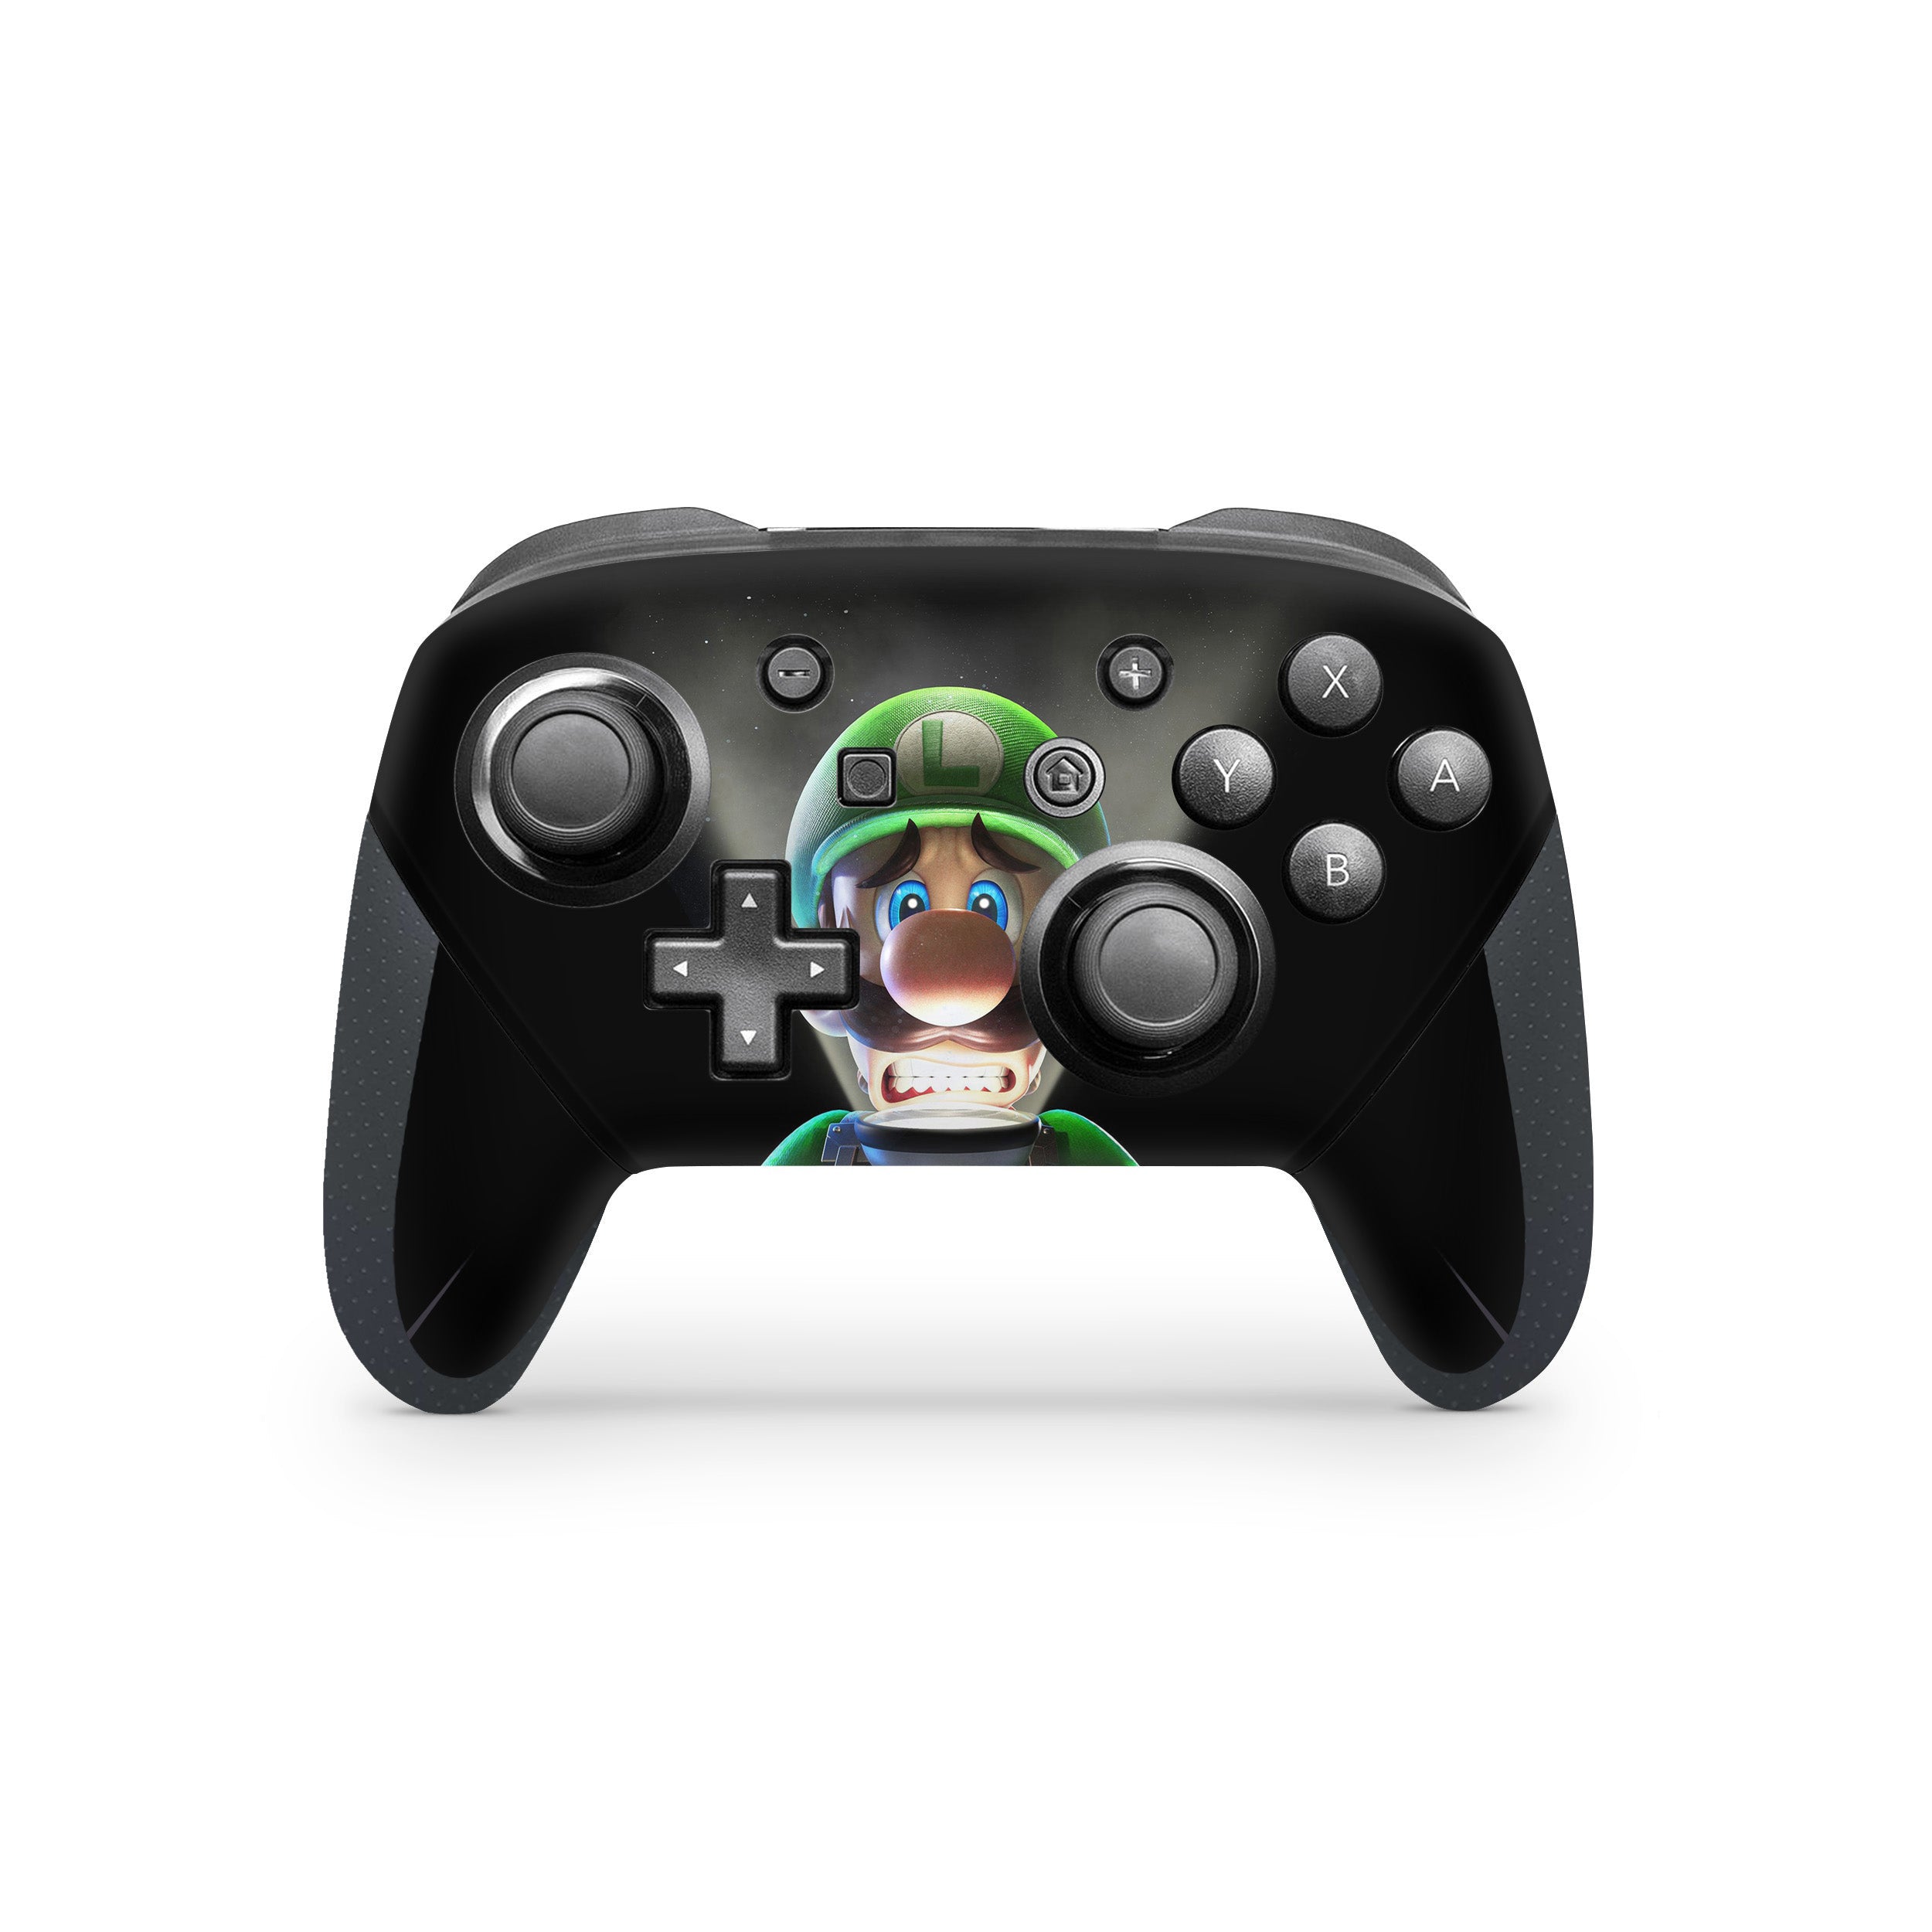 A video game skin featuring a Luigi design for the Switch Pro Controller.